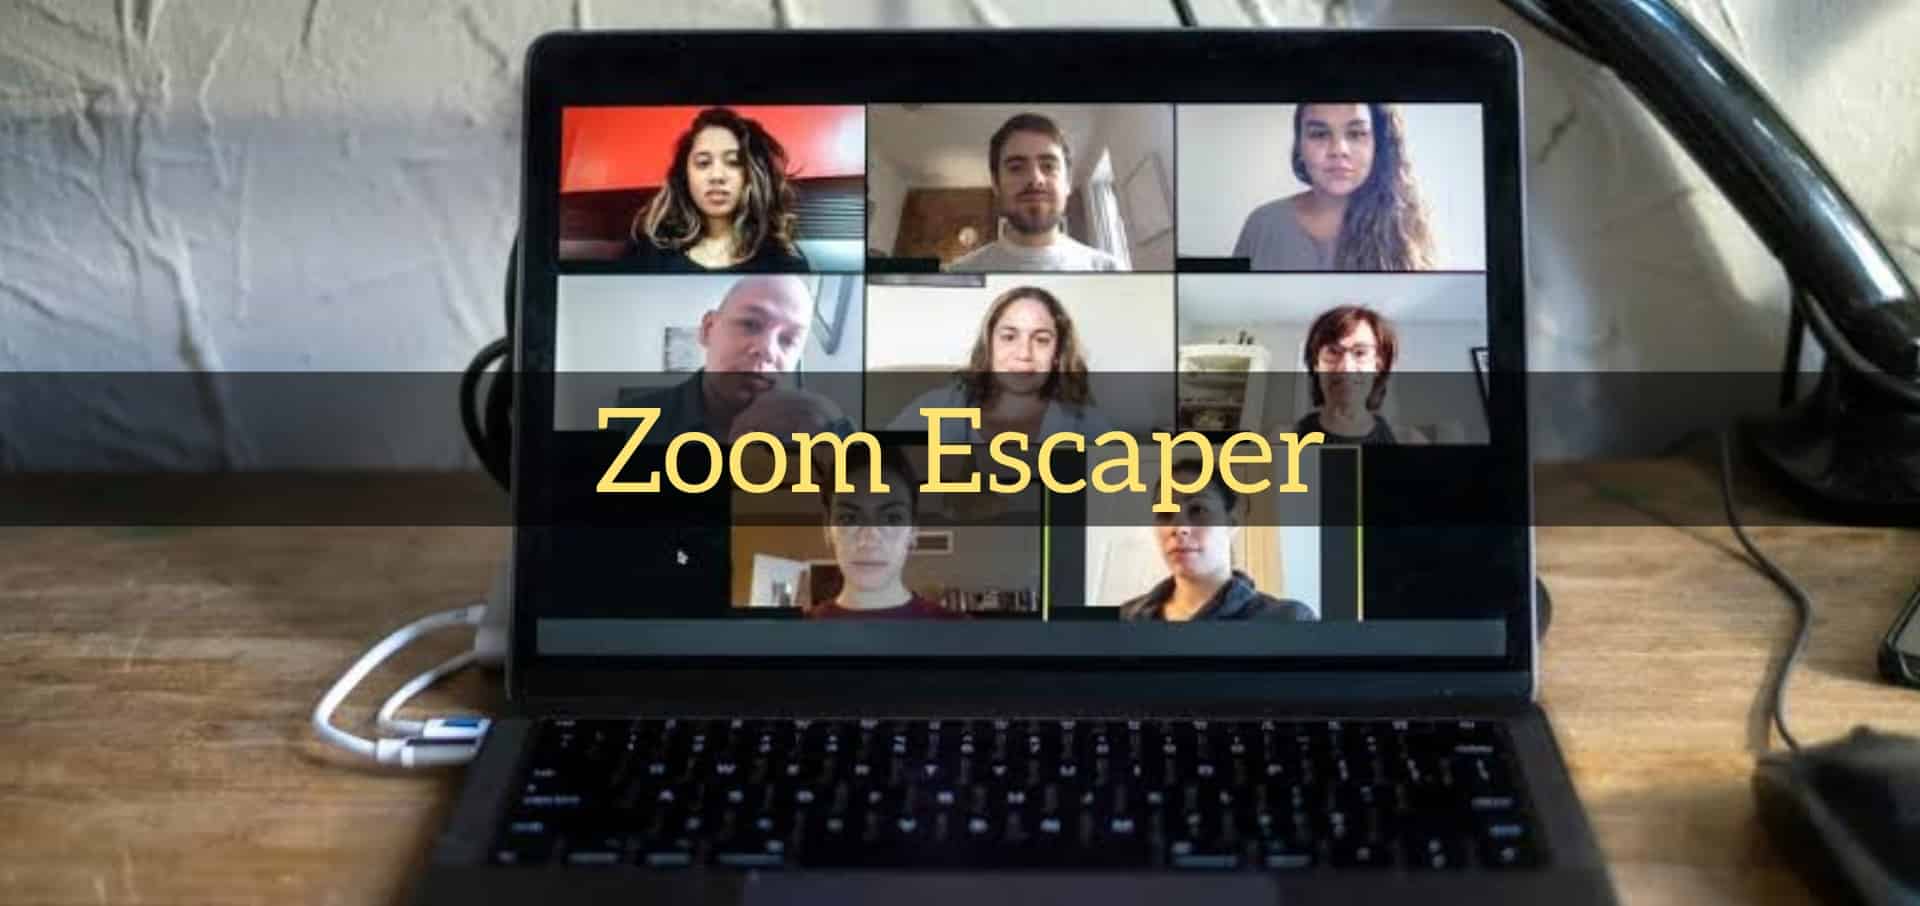 Meet Zoom Escaper: A New App That Lets You Escape Boring Zoom Meetings by Playing Unbearable Sounds